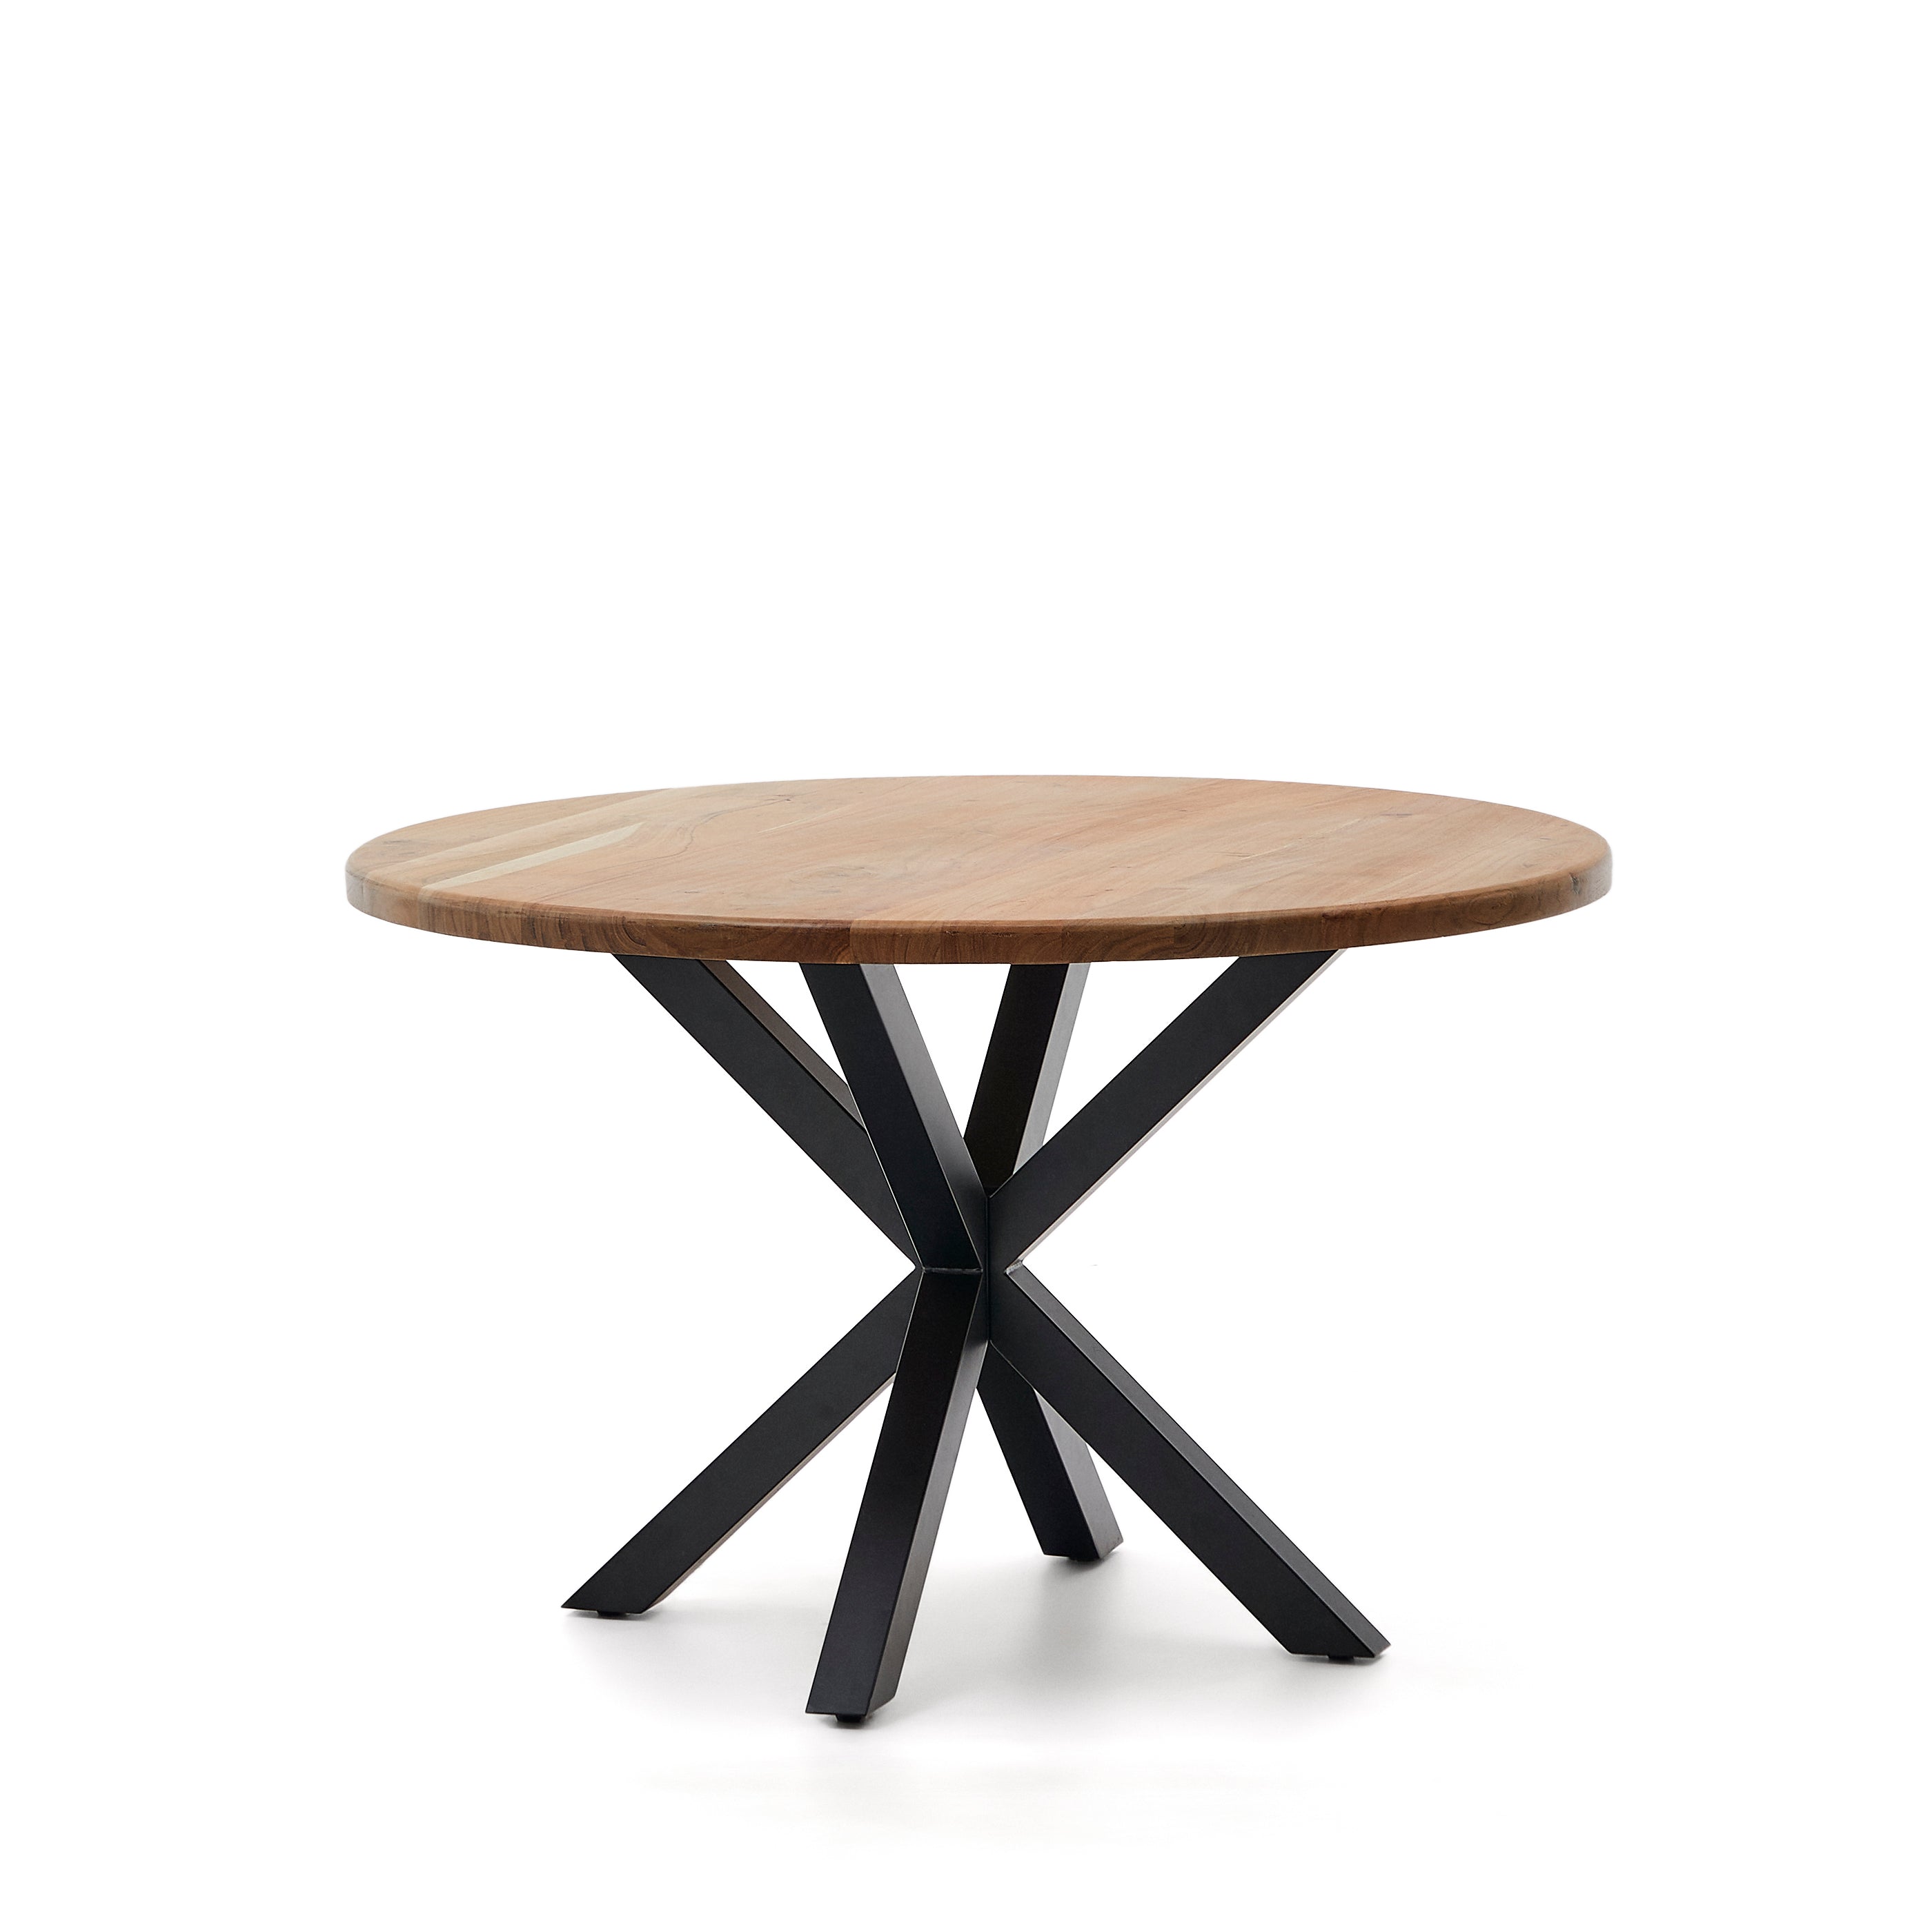 Argo round table made of solid acacia wood and steel legs with black finish, Ø 120 cm